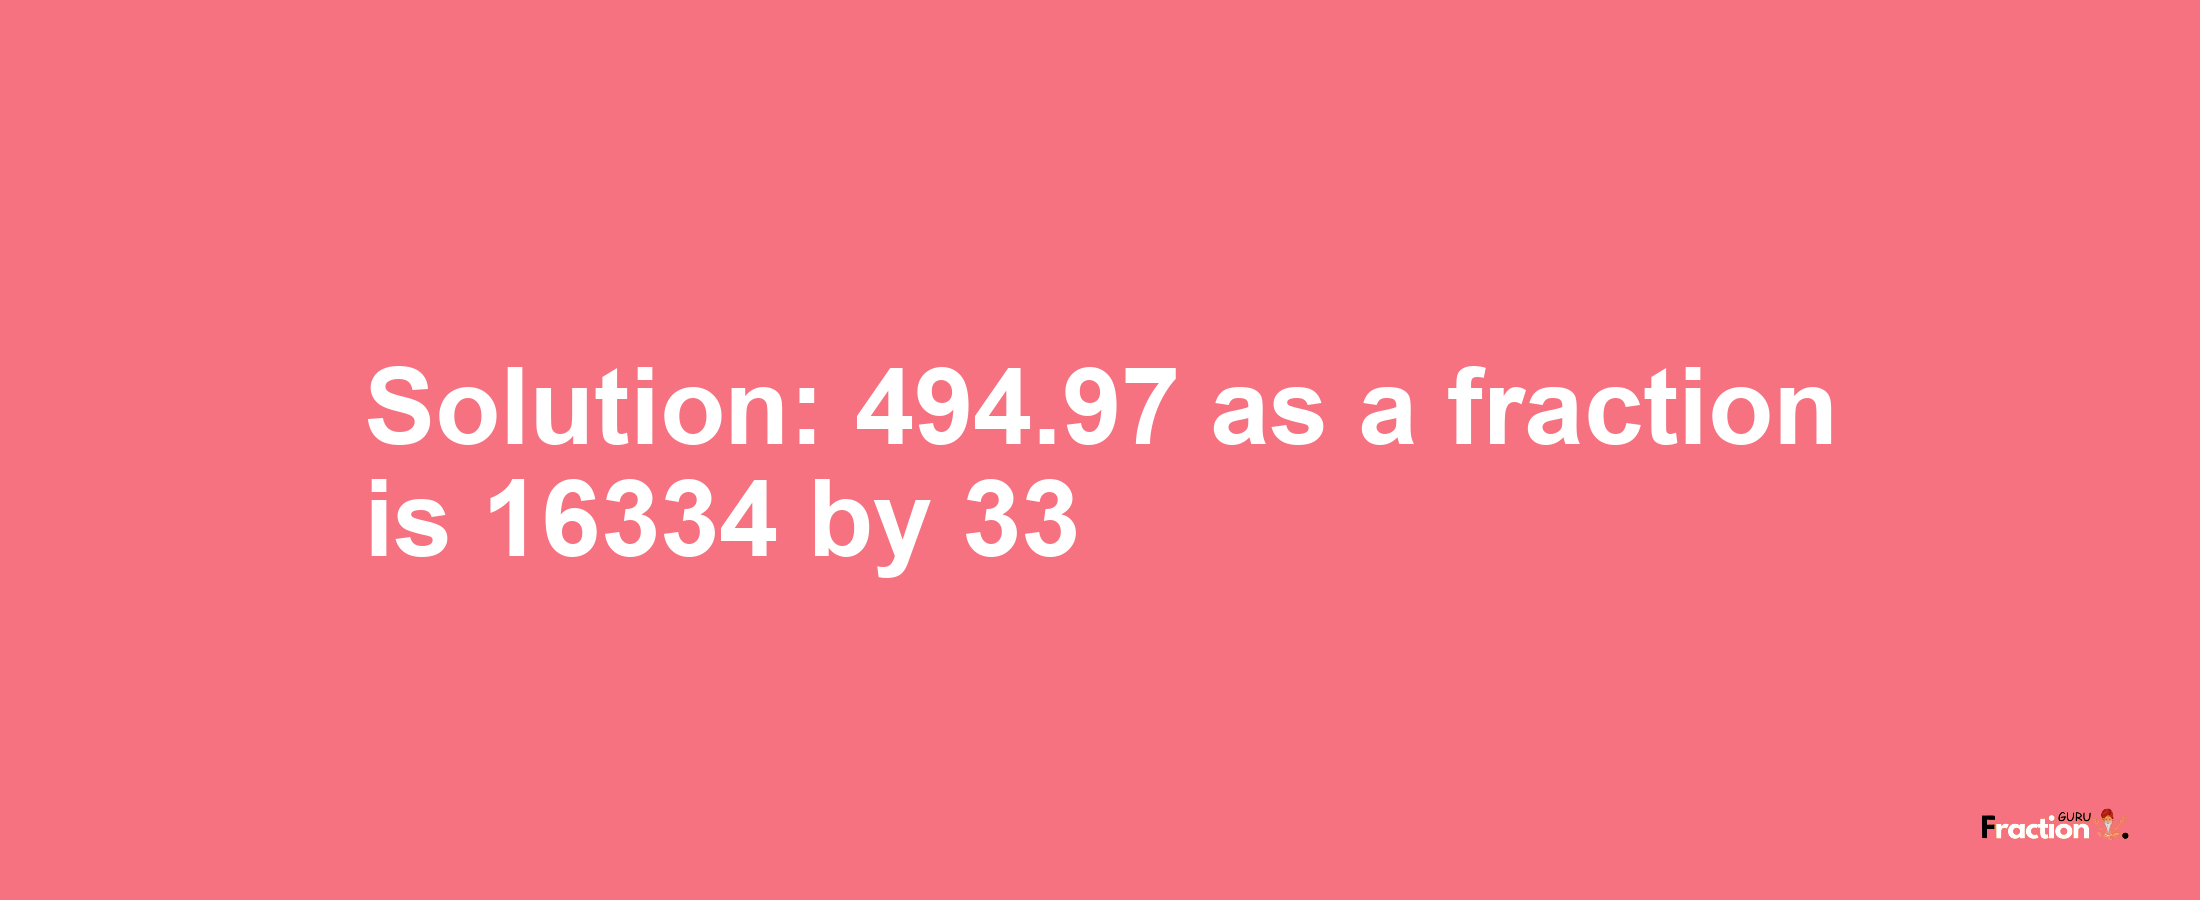 Solution:494.97 as a fraction is 16334/33